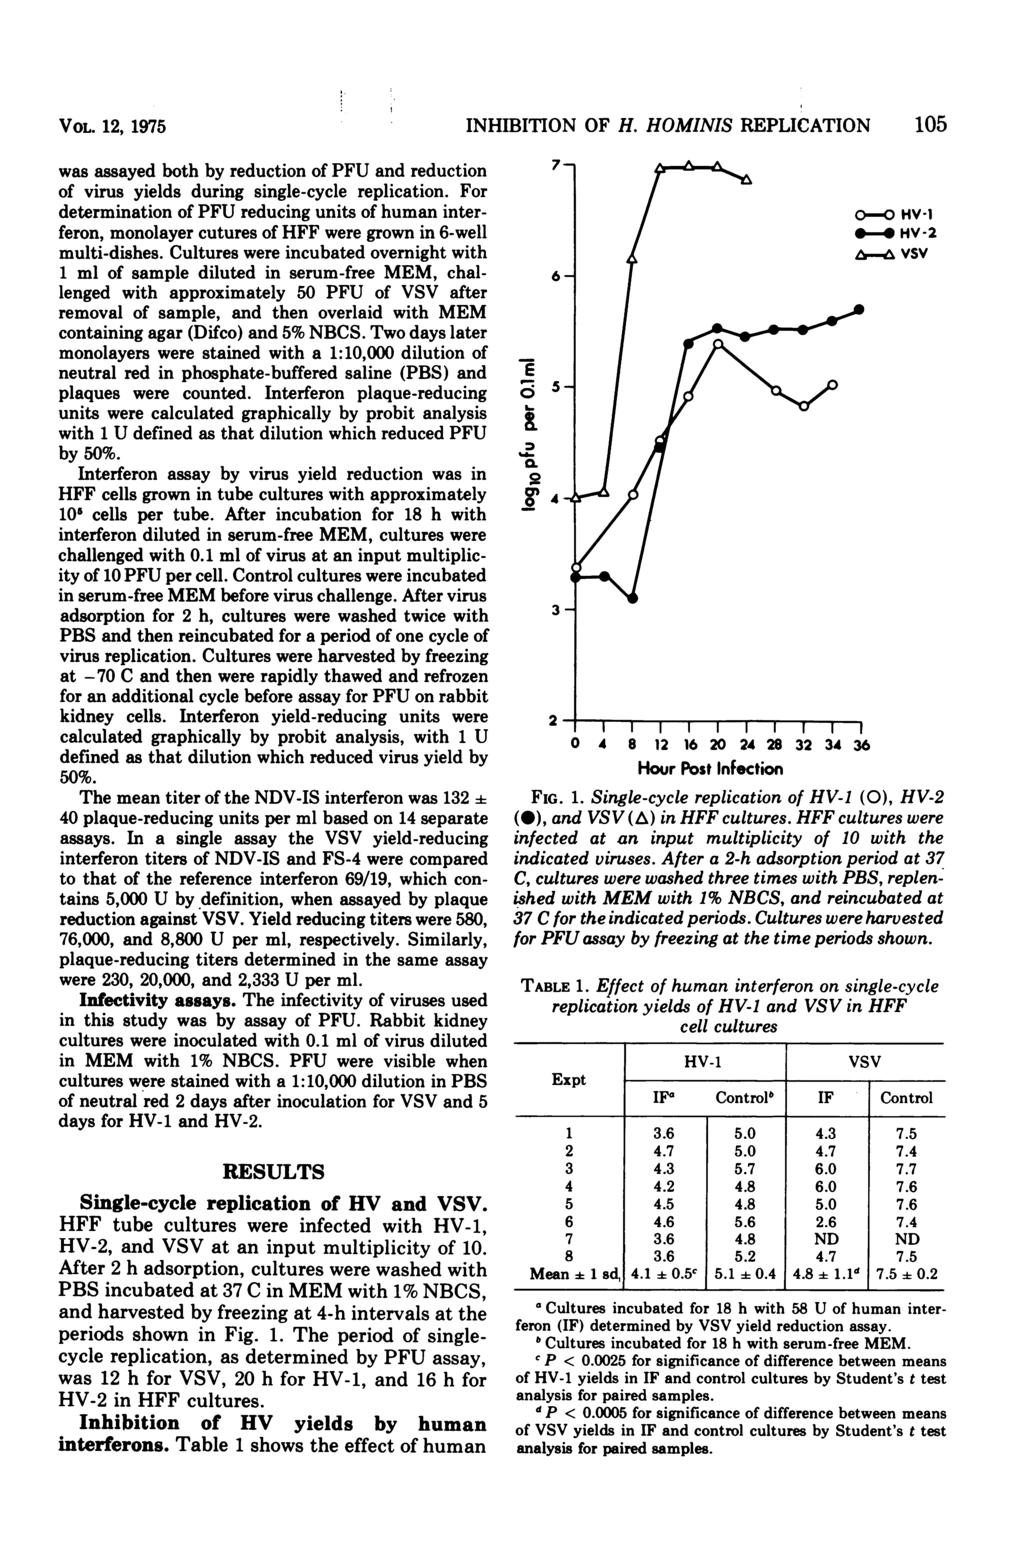 VOL. 12, 1975 INHIBITION OF H. HOMINIS REPLICATION 105 was assayed both by reduction of PFU and reduction of virus yields during single-cycle replication.